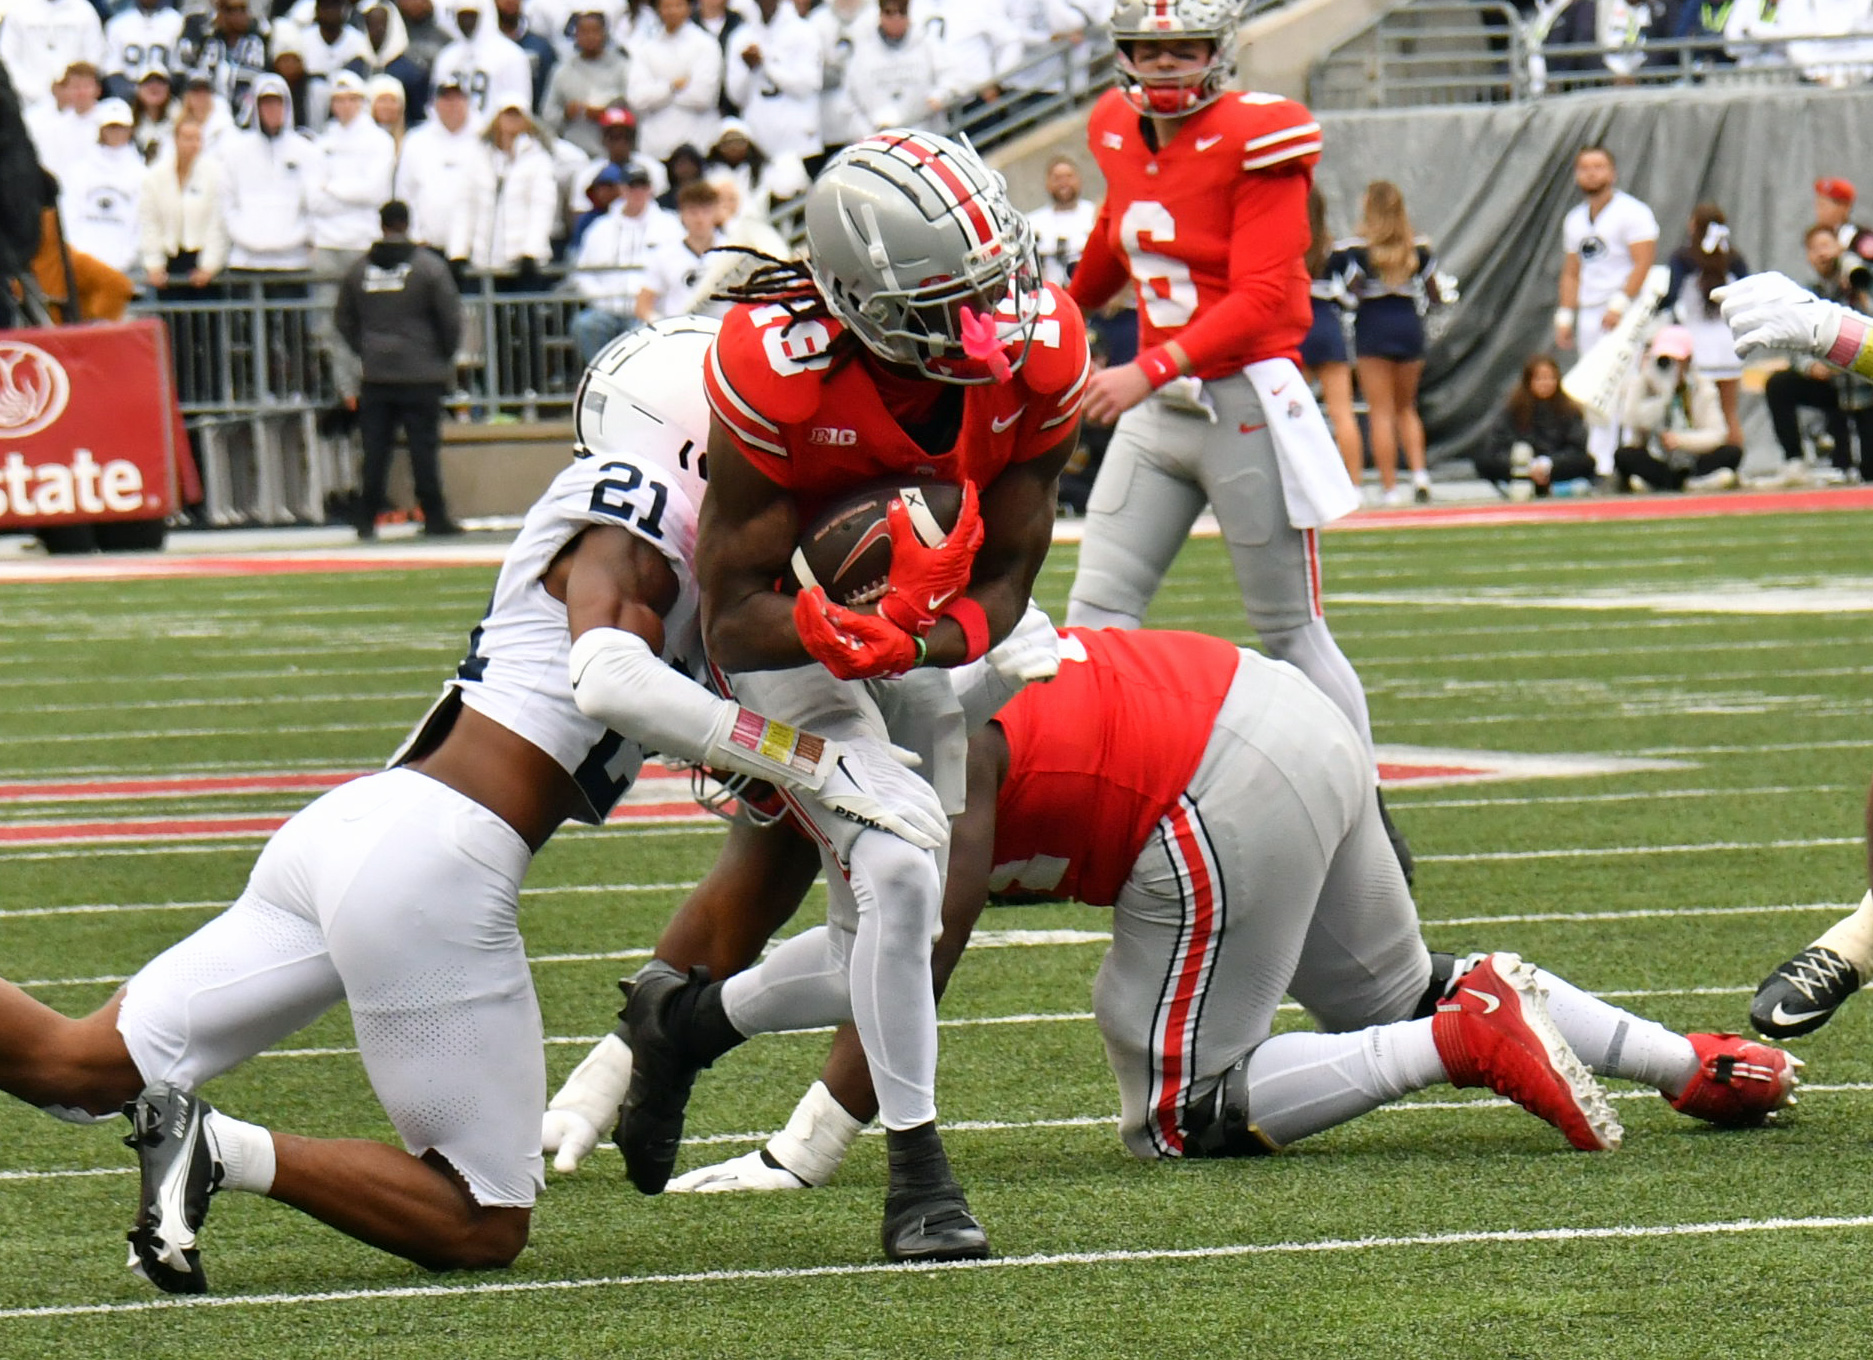 Marvin Harrison Jr. named Big Ten Co-Offensive Player of the Week